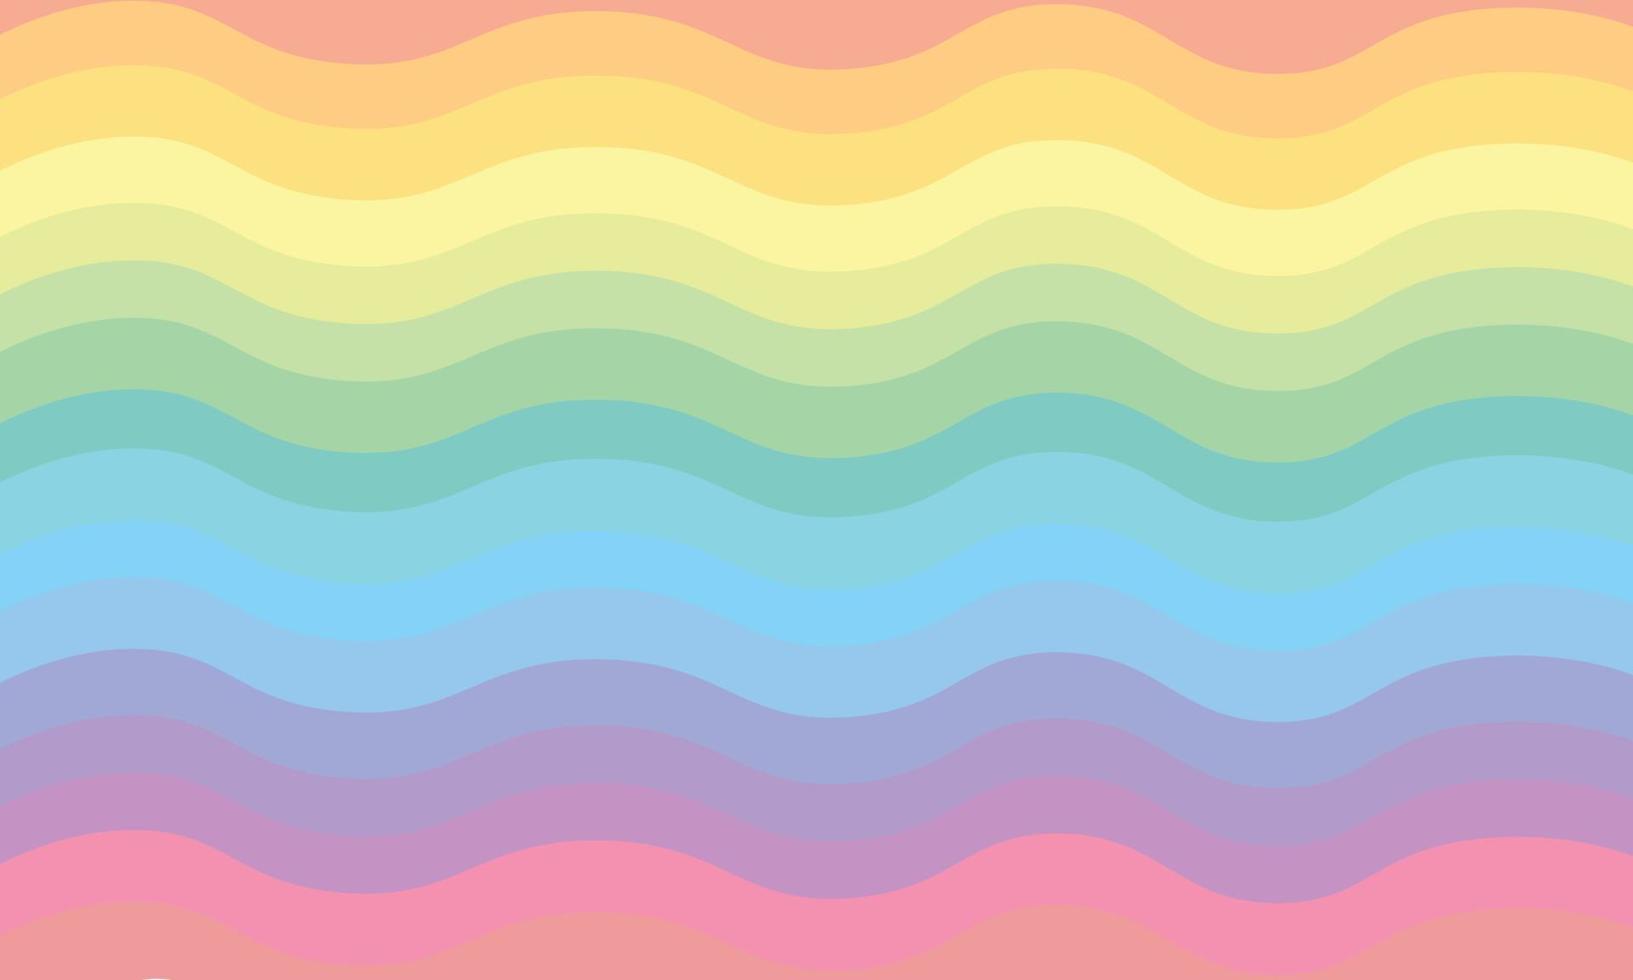 Colorful cursive stripes cute pattern background Free Vector